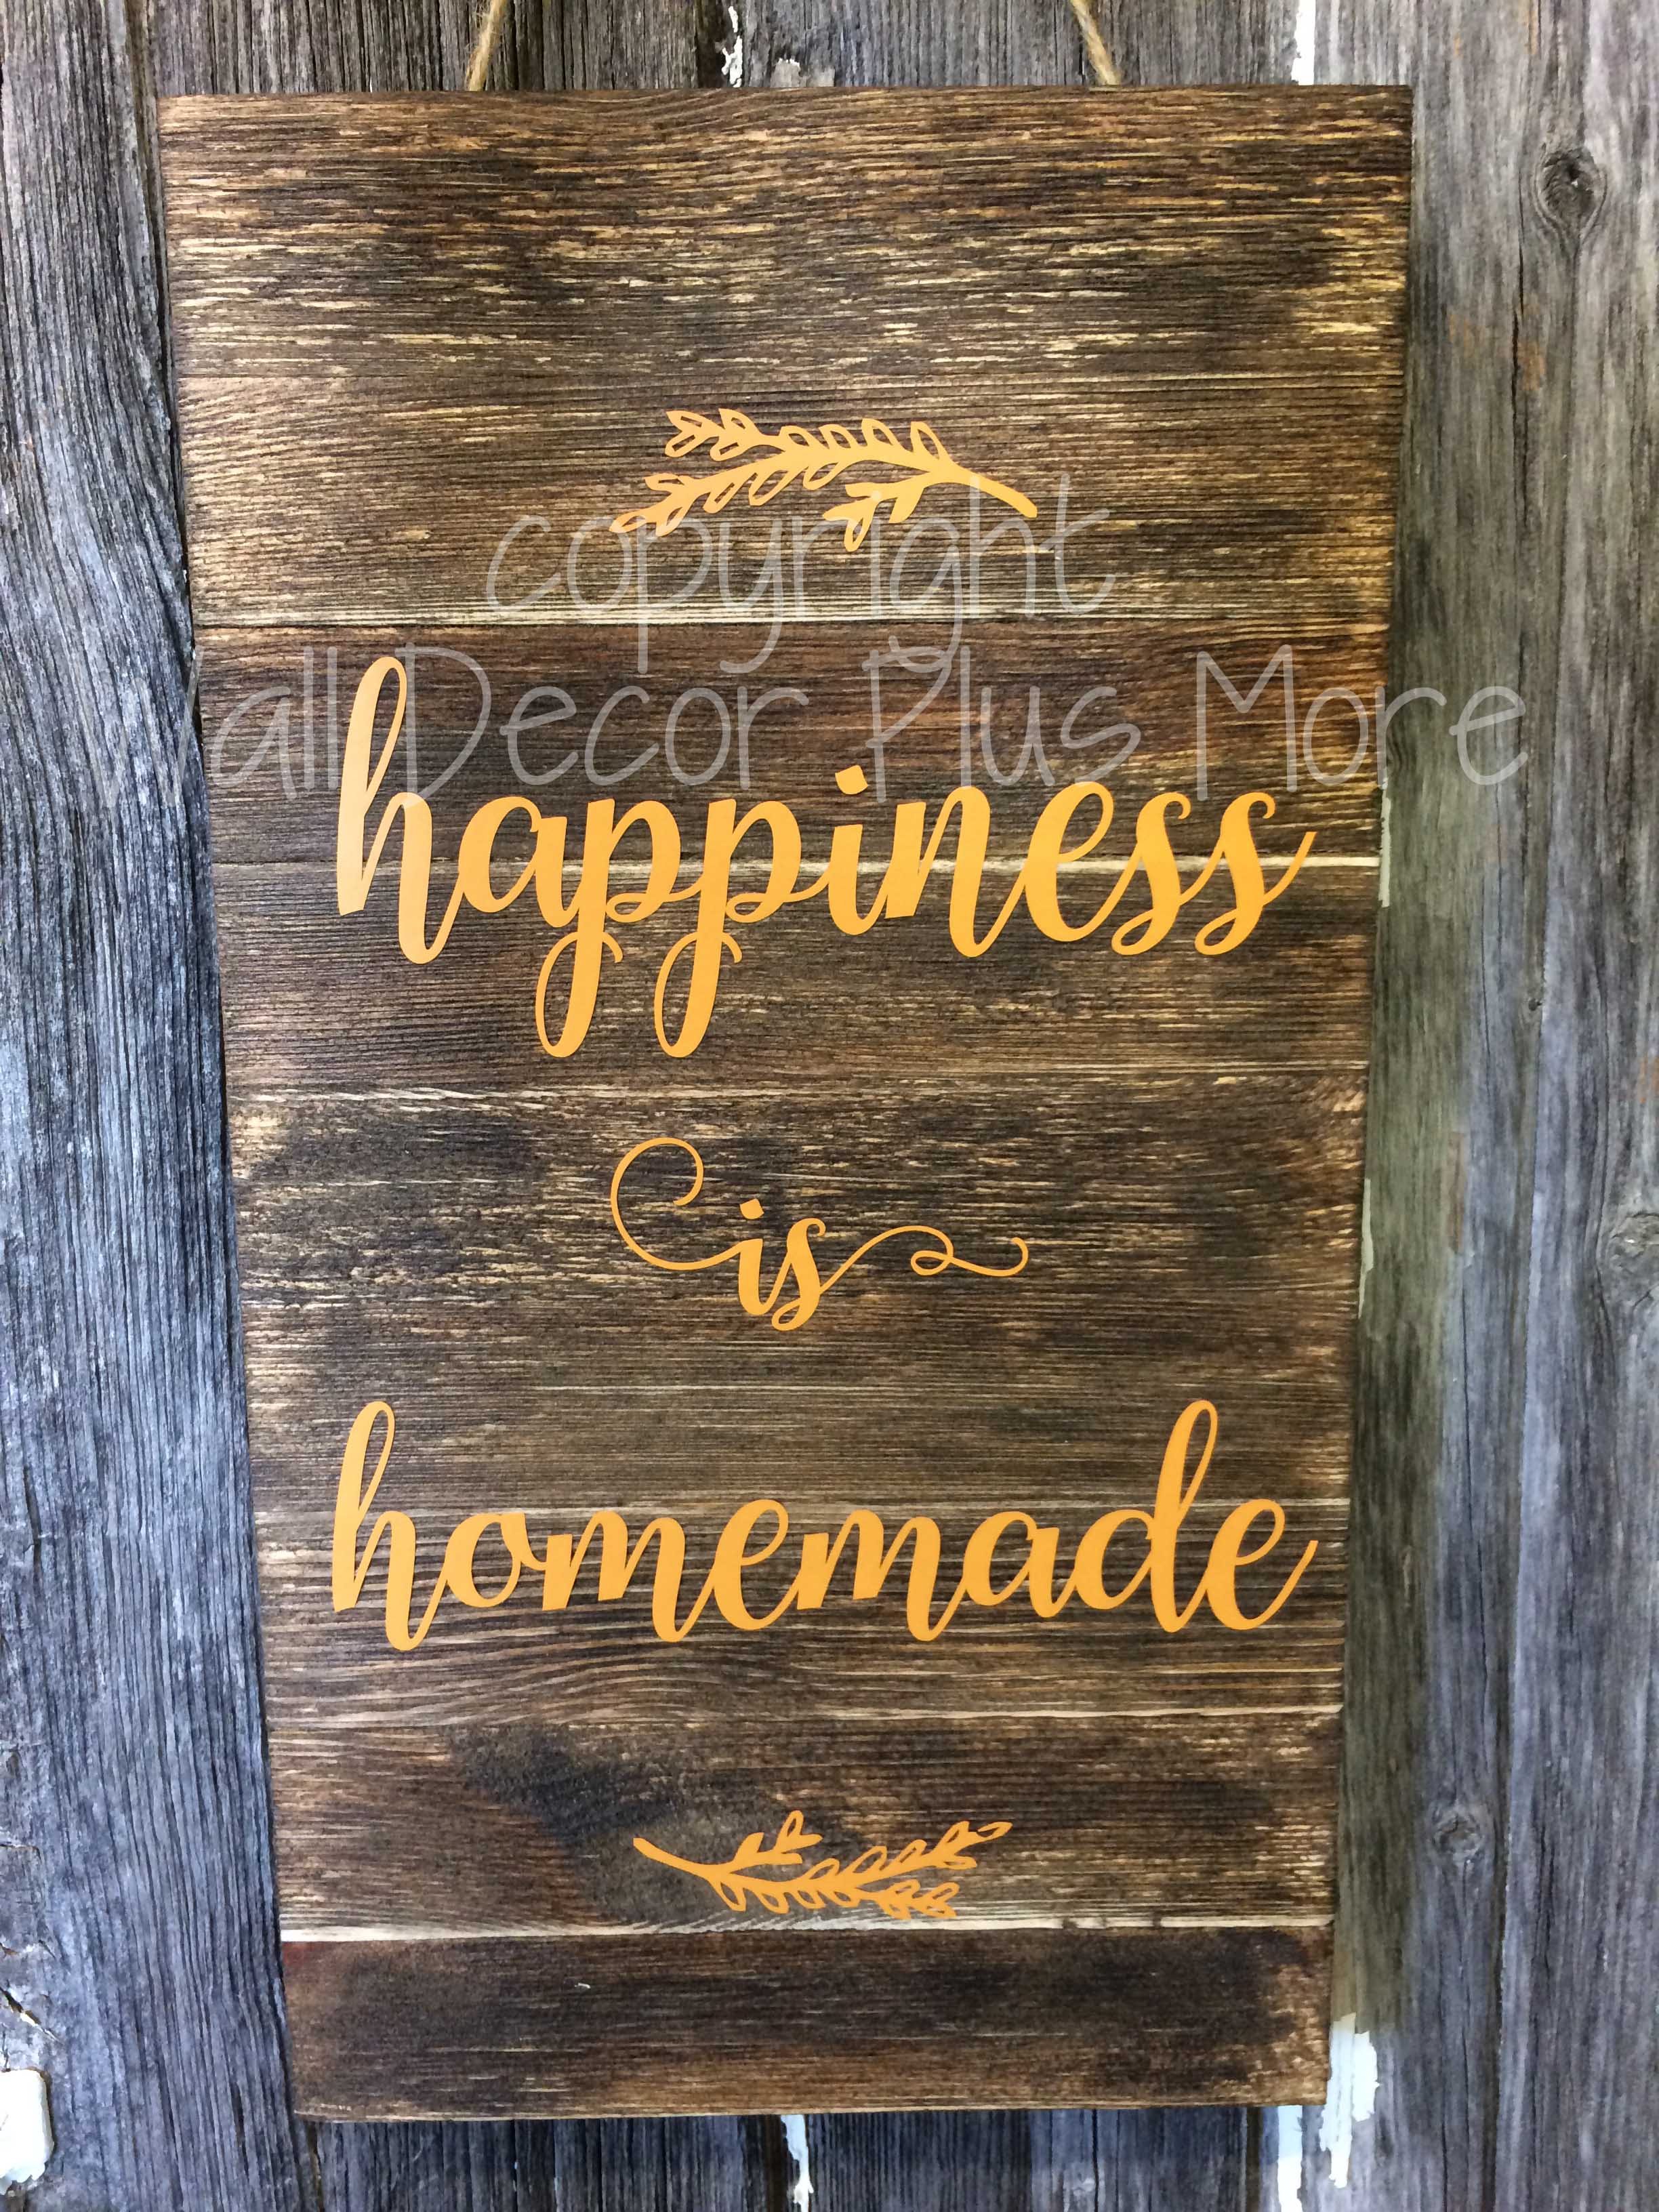 Happiness Quote Decal Sticker on a Rustic Wood Sign